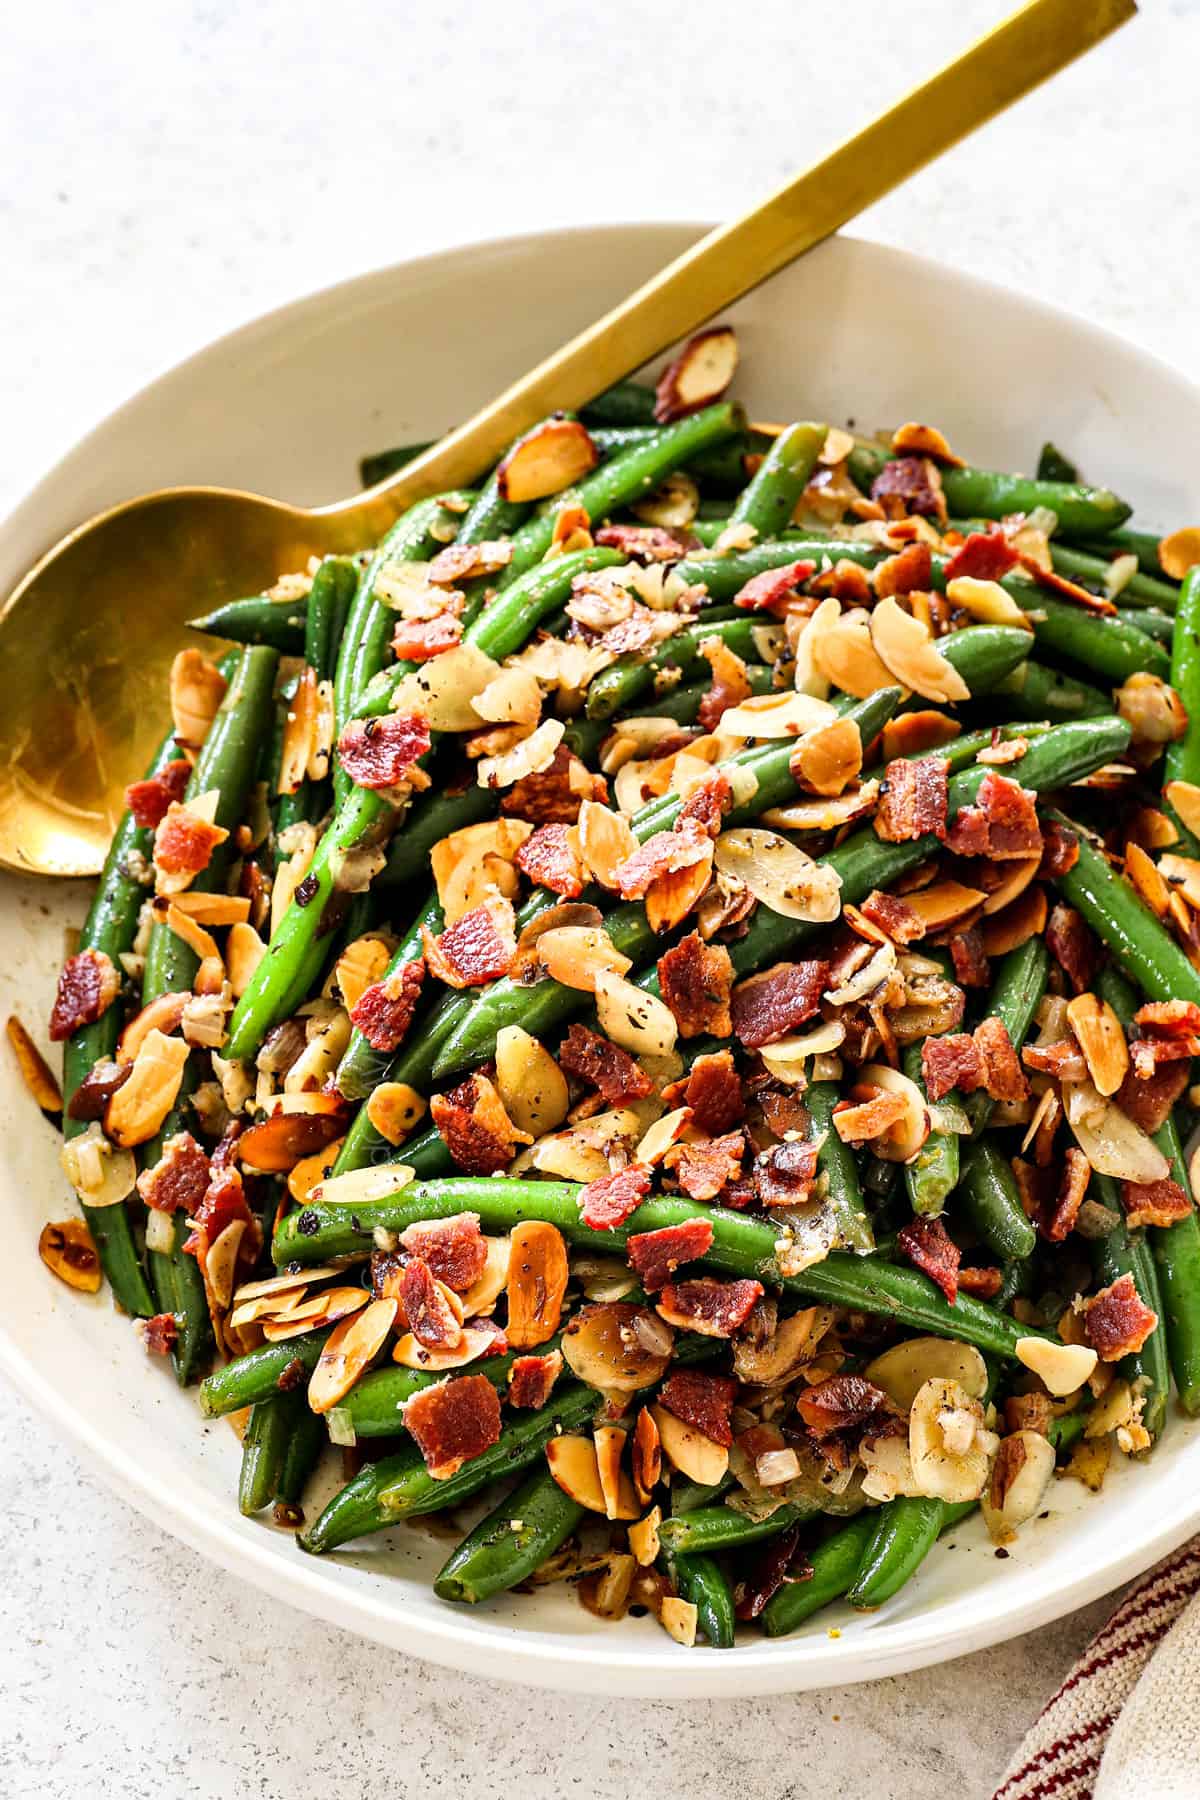 serving Green Beans Almondine in a bowl garnished by almonds and bacon